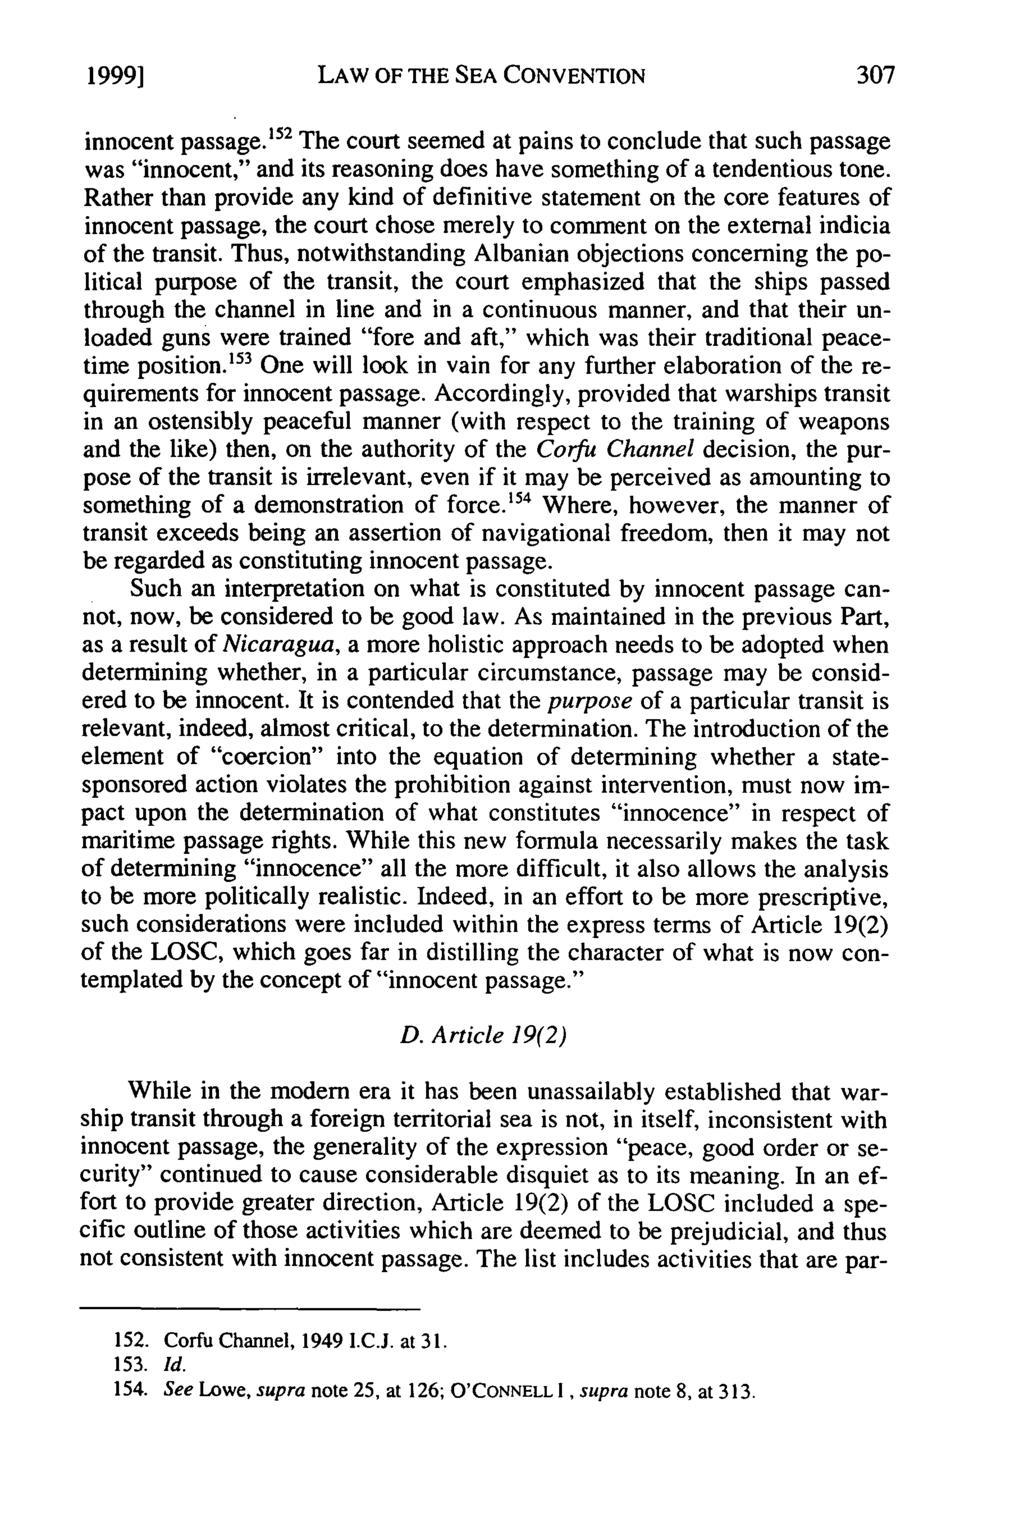 1999] Stephens: The Impact of the 1982 Law of the Sea Convention on the Conduct o LAW OF THE SEA CONVENTION innocent passage.